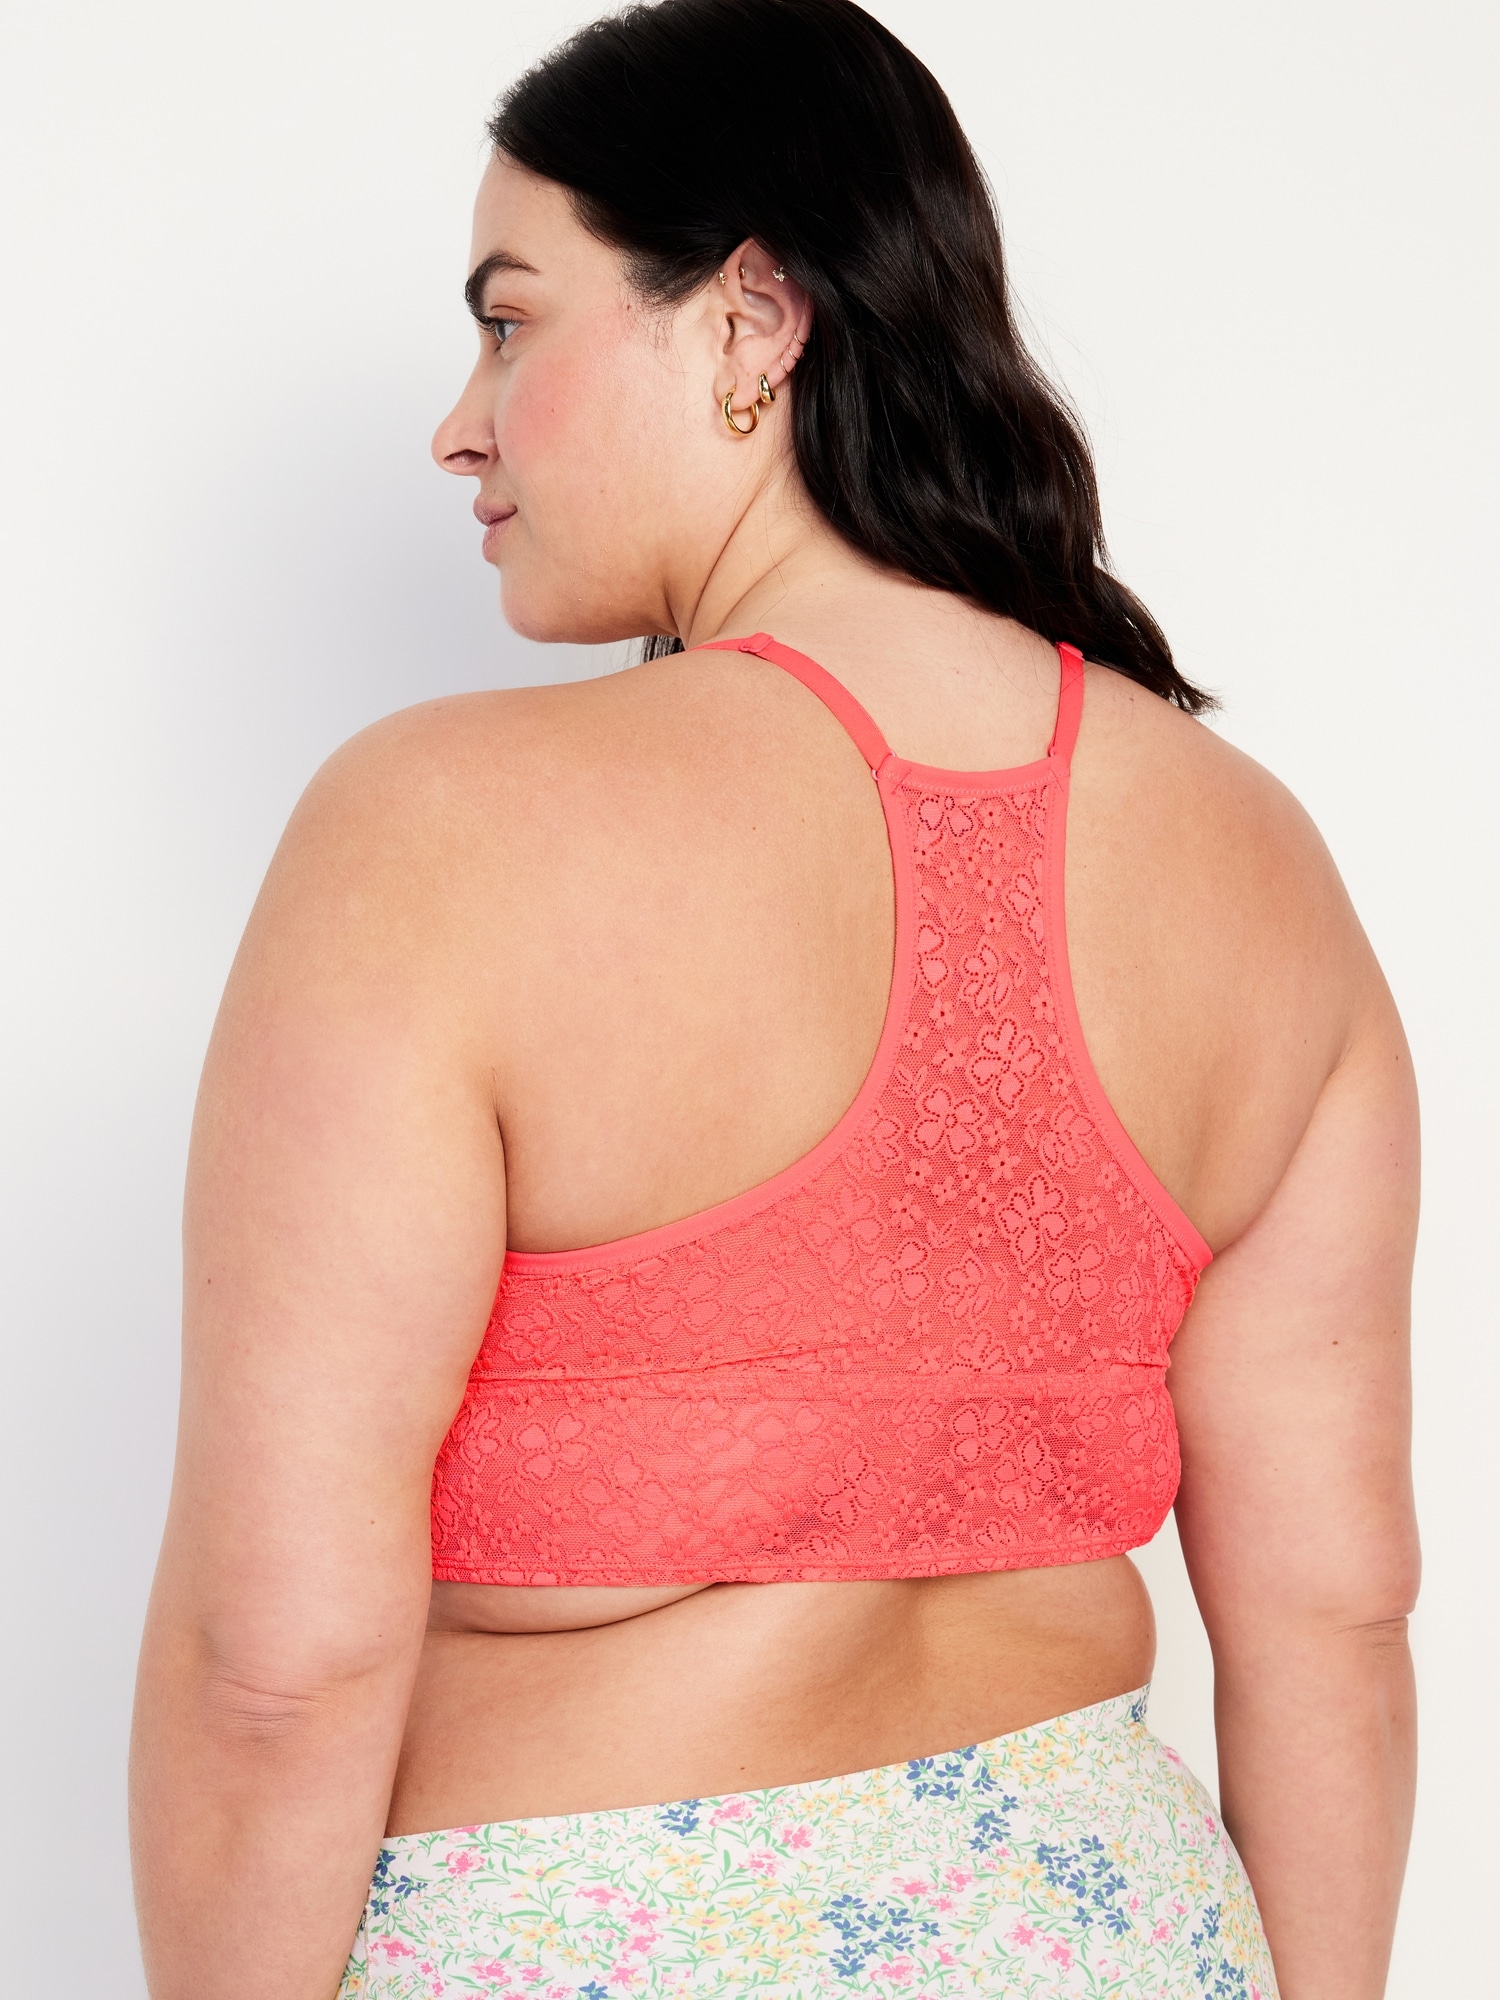 Lace bra racerback - 10 products